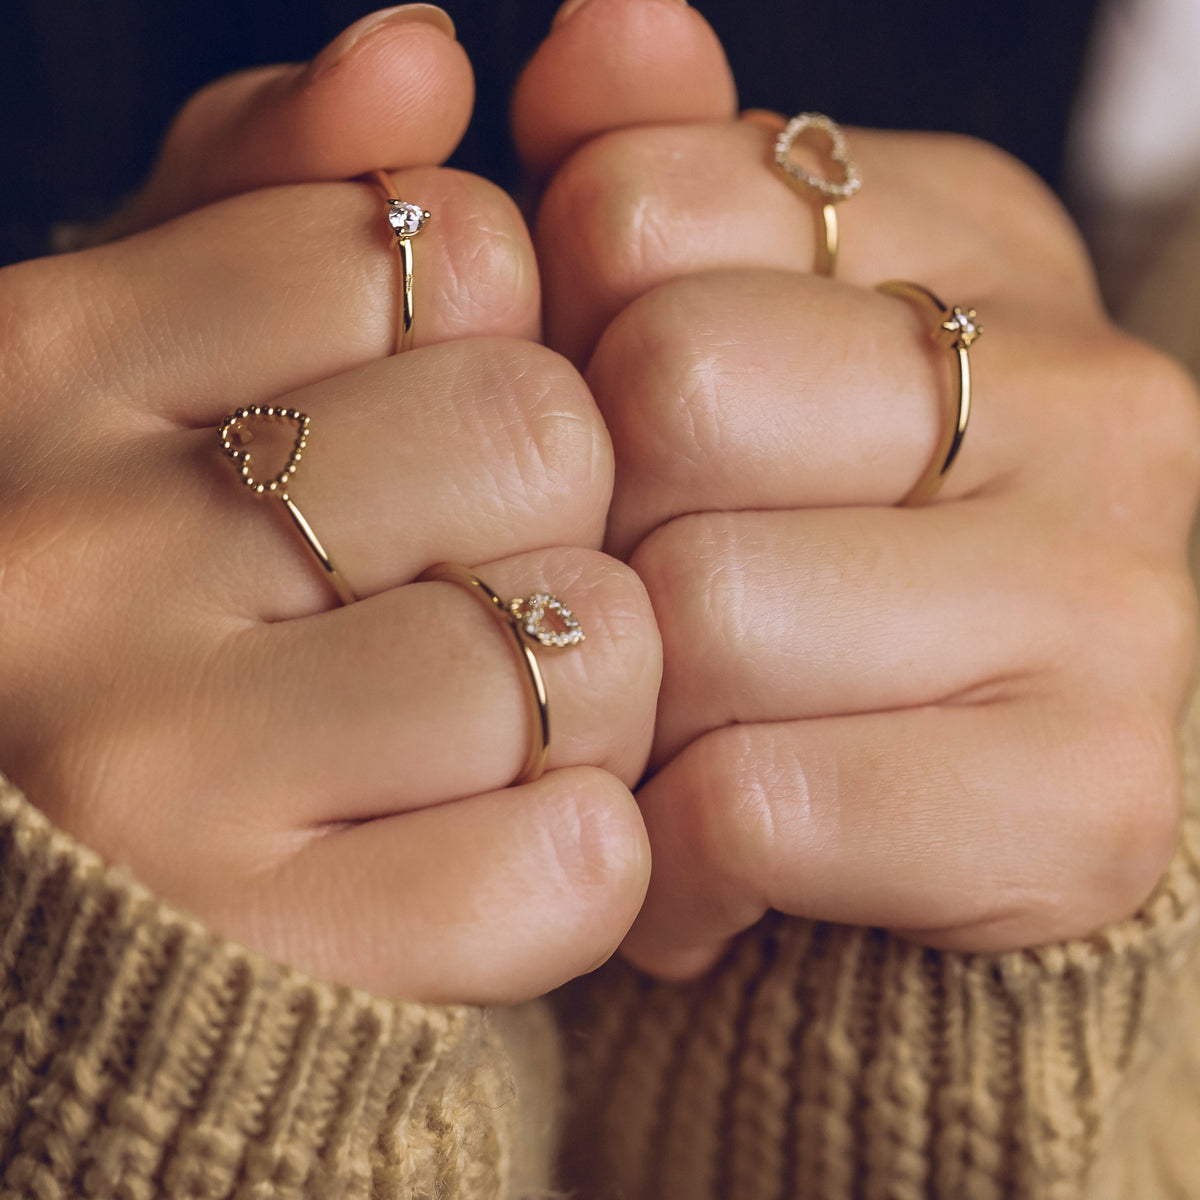 Stackable Tiny Star Ring